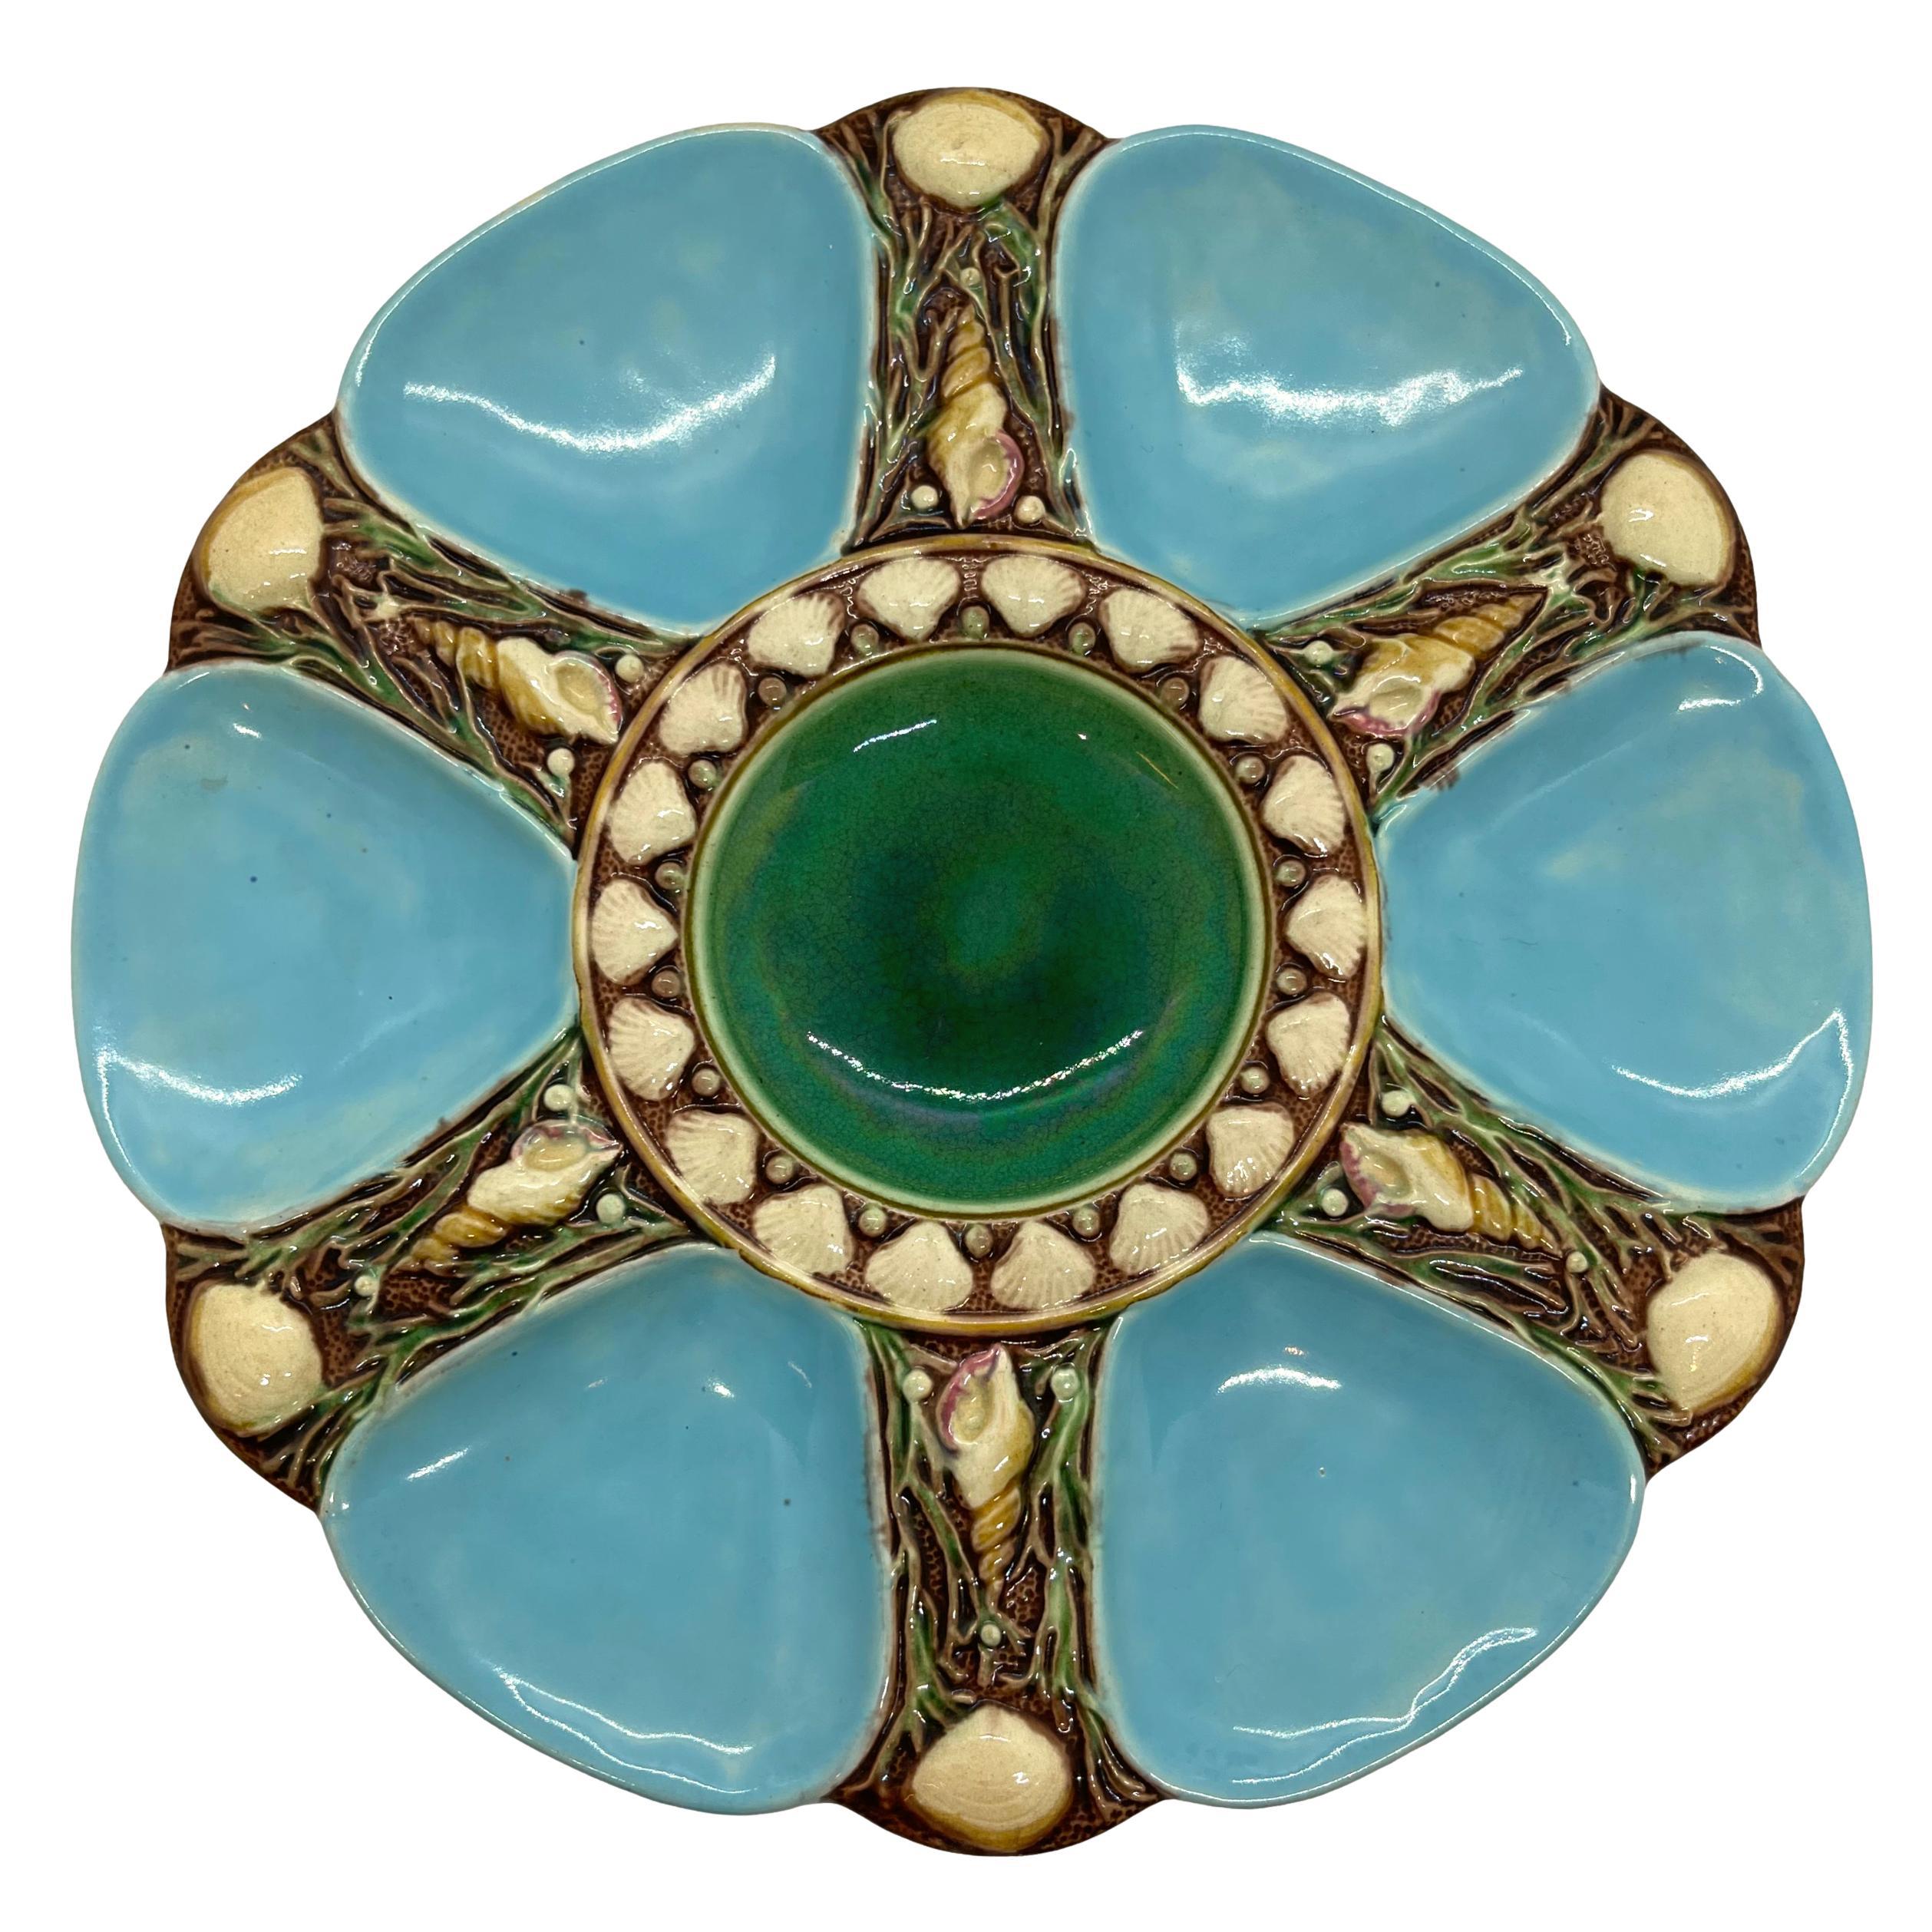 Minton Majolica Turquoise Six Well Oyster Plate, English, Dated 1874